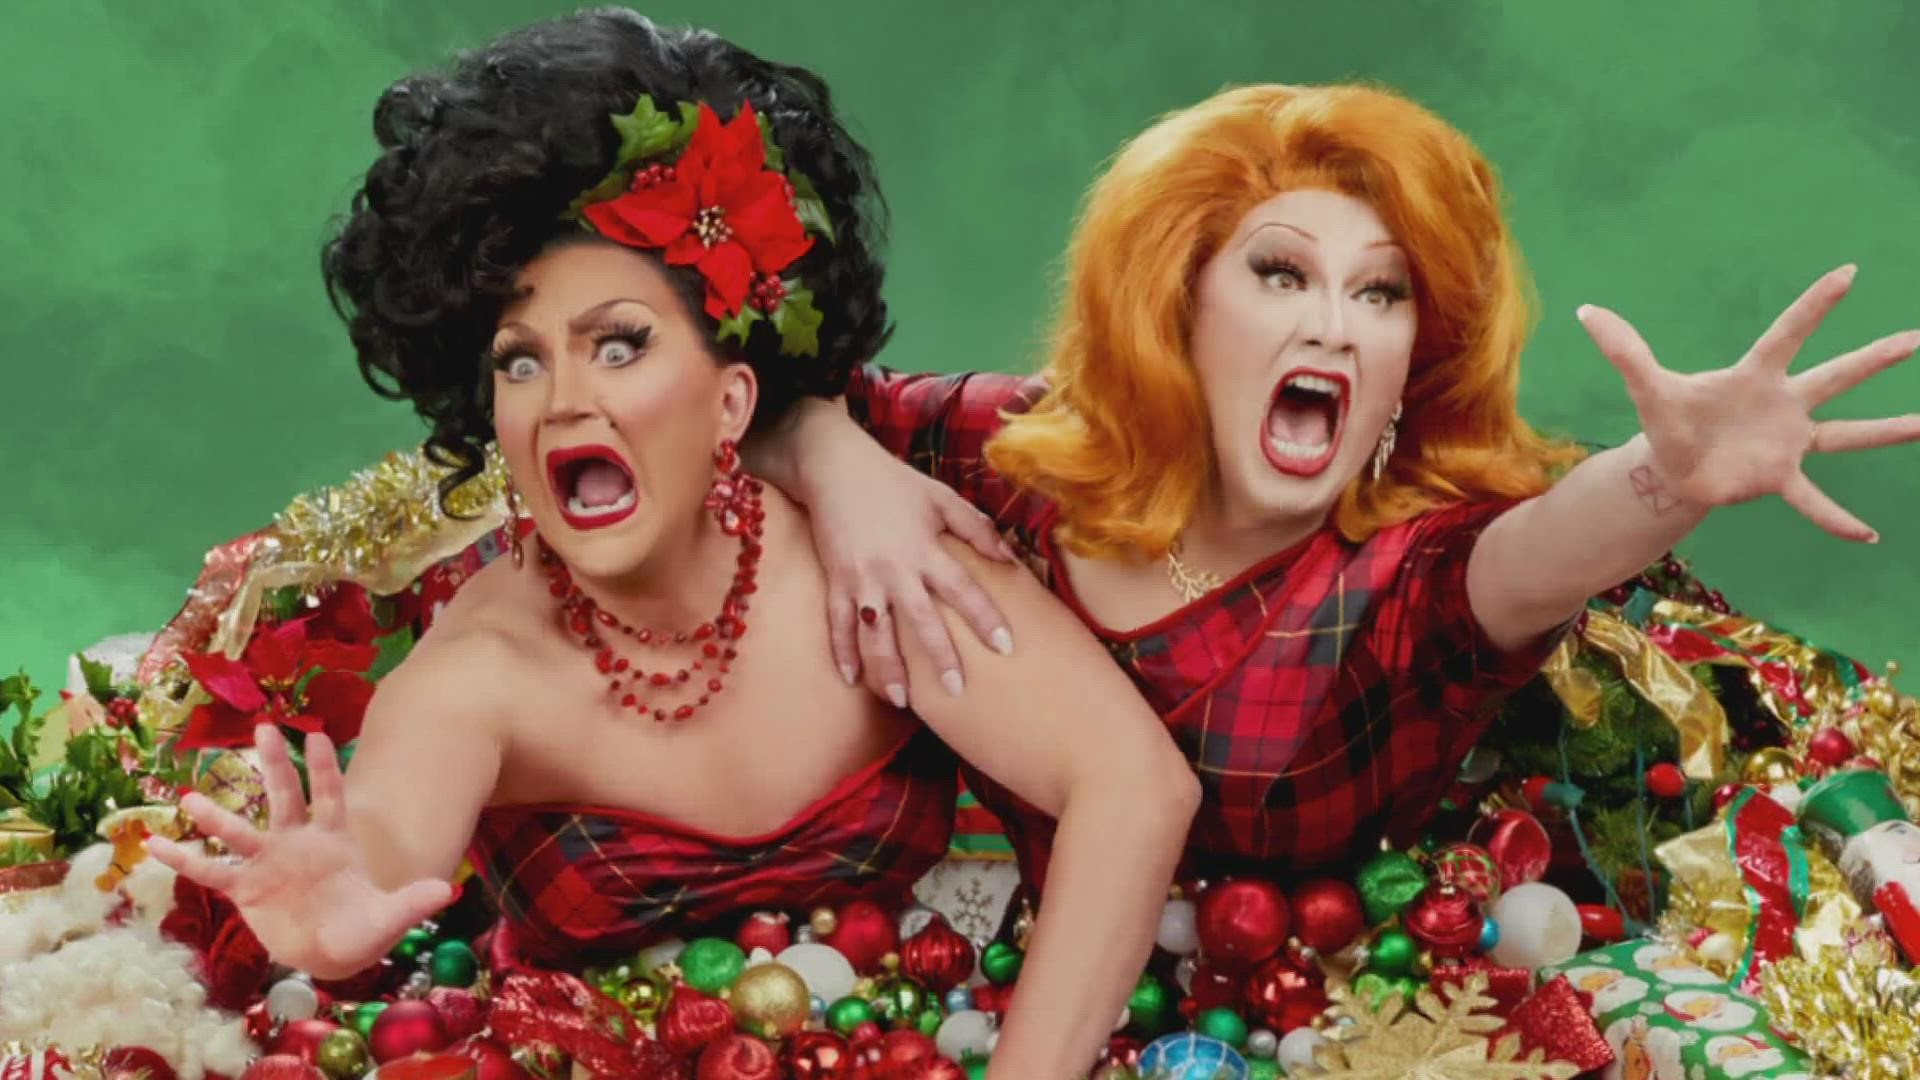 "The Return of the Jinkx & DeLa Holiday Show Live comes to Maine. The former RuPaul's Drag Race contestants will perform at the State Theatre on Nov. 30.